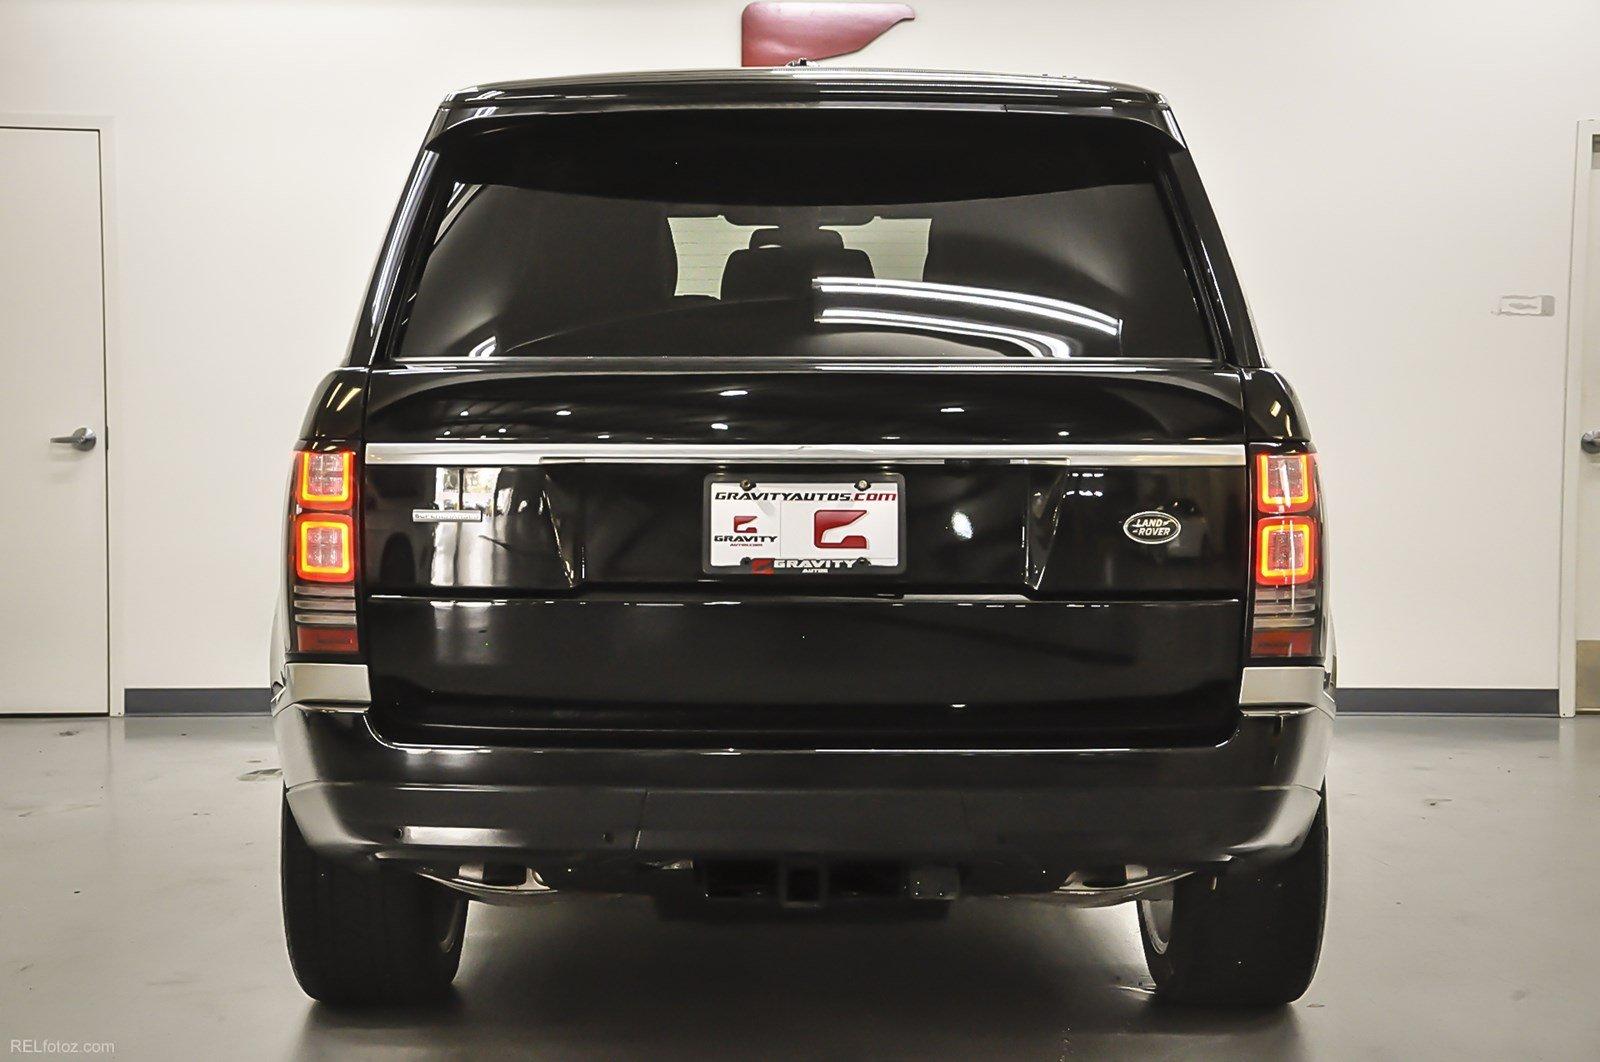 Used 2014 Land Rover Range Rover Supercharged for sale Sold at Gravity Autos Marietta in Marietta GA 30060 5